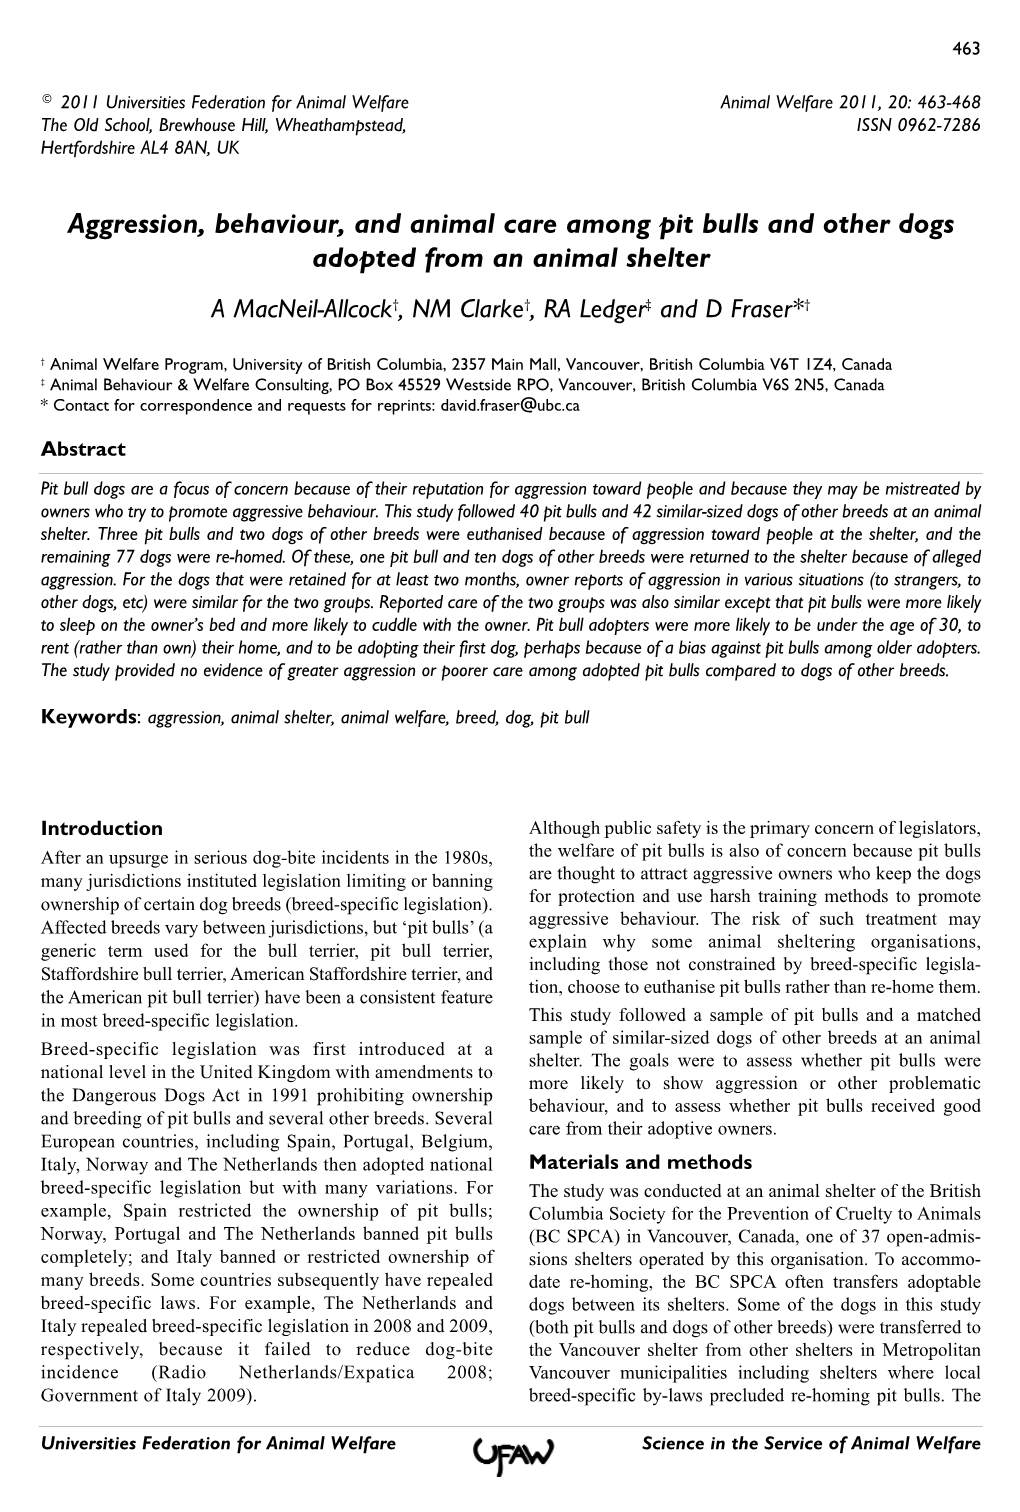 Aggression, Behaviour, and Animal Care Among Pit Bulls and Other Dogs Adopted from an Animal Shelter a Macneil-Allcock†, NM Clarke†, RA Ledger‡ and D Fraser*†